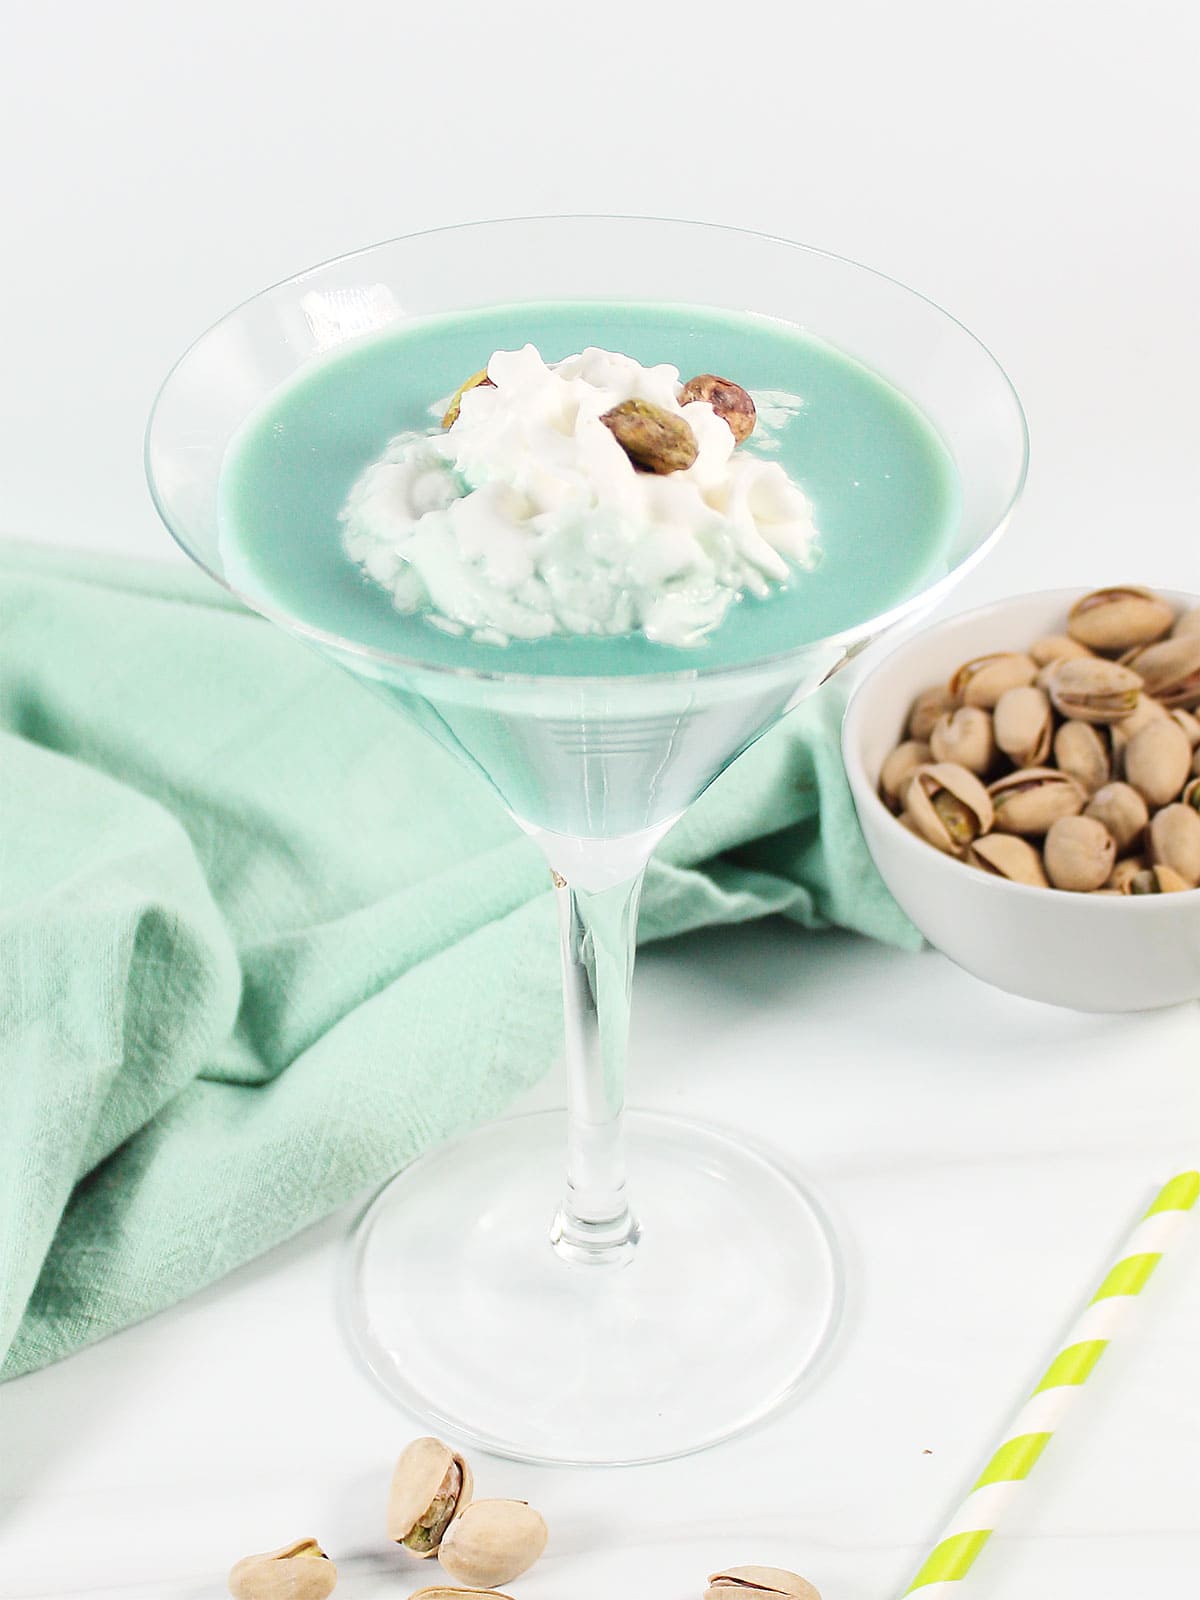 Pistachio Martini garnished with whipped cream and three pistachios.